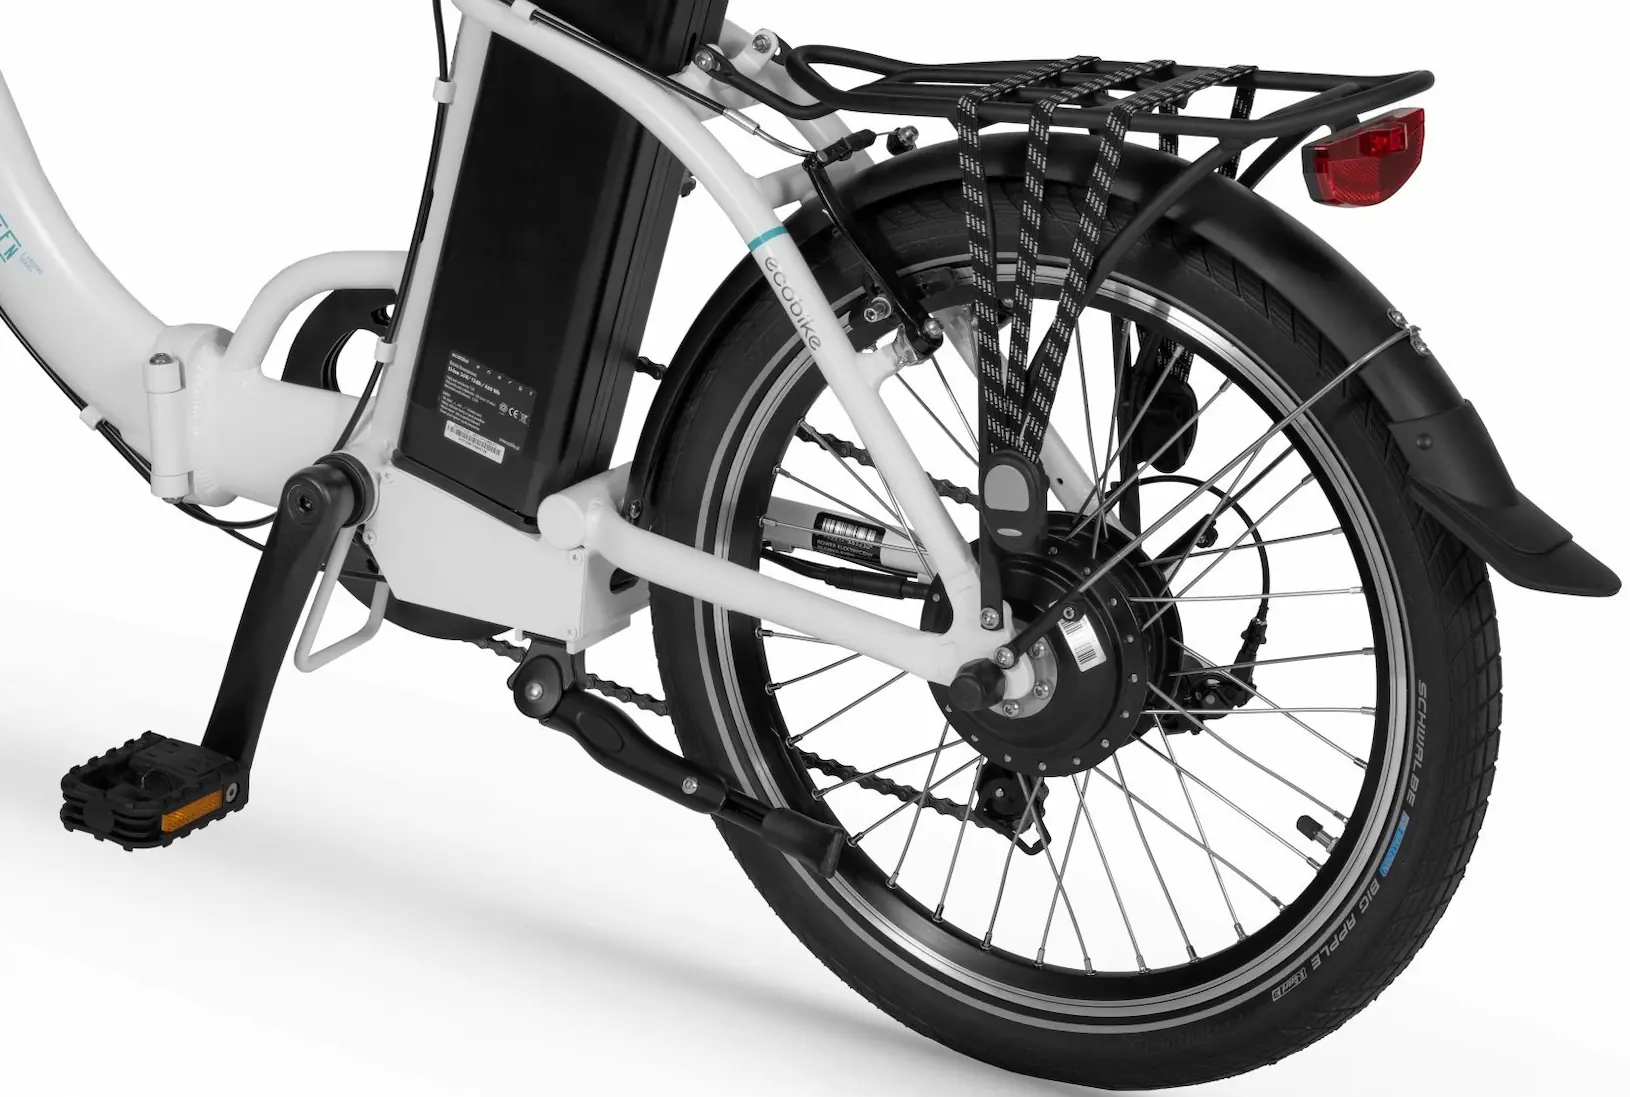 Folding Electric Bike 20 Inch Step Through Ecobike Even White 520Wh